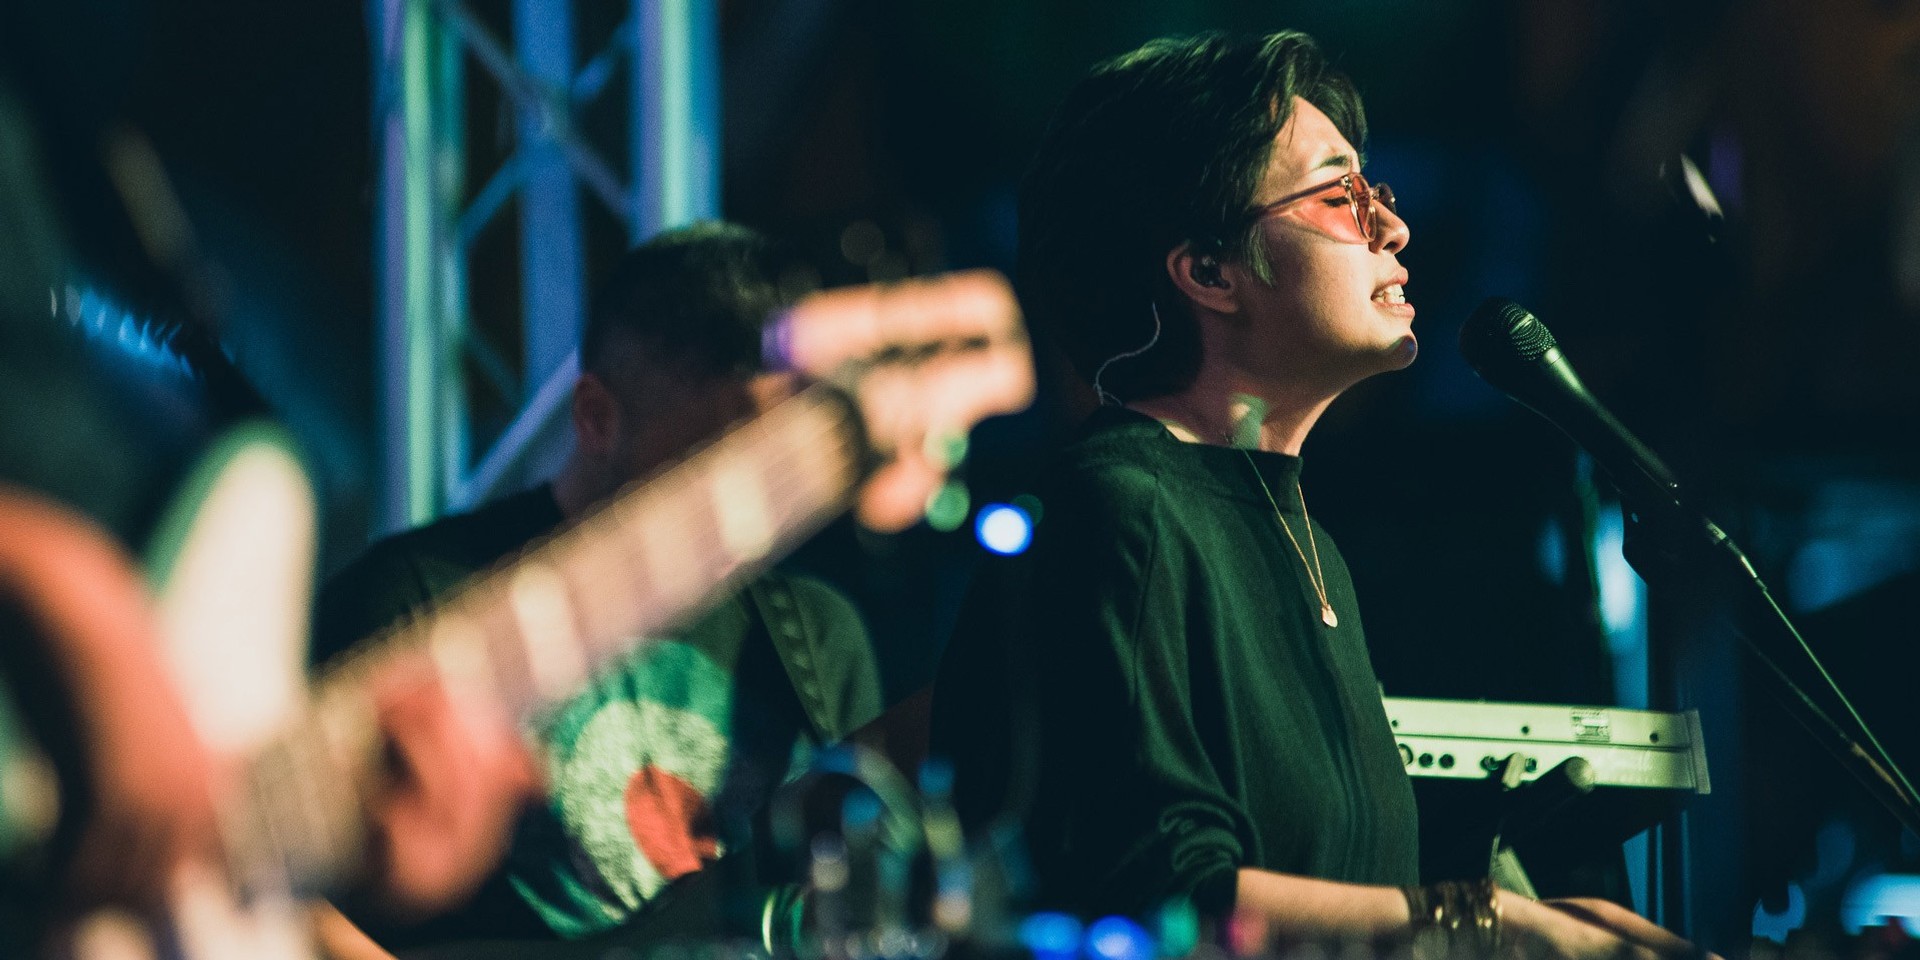 Armi Millare to perform with D'Sound in Norway